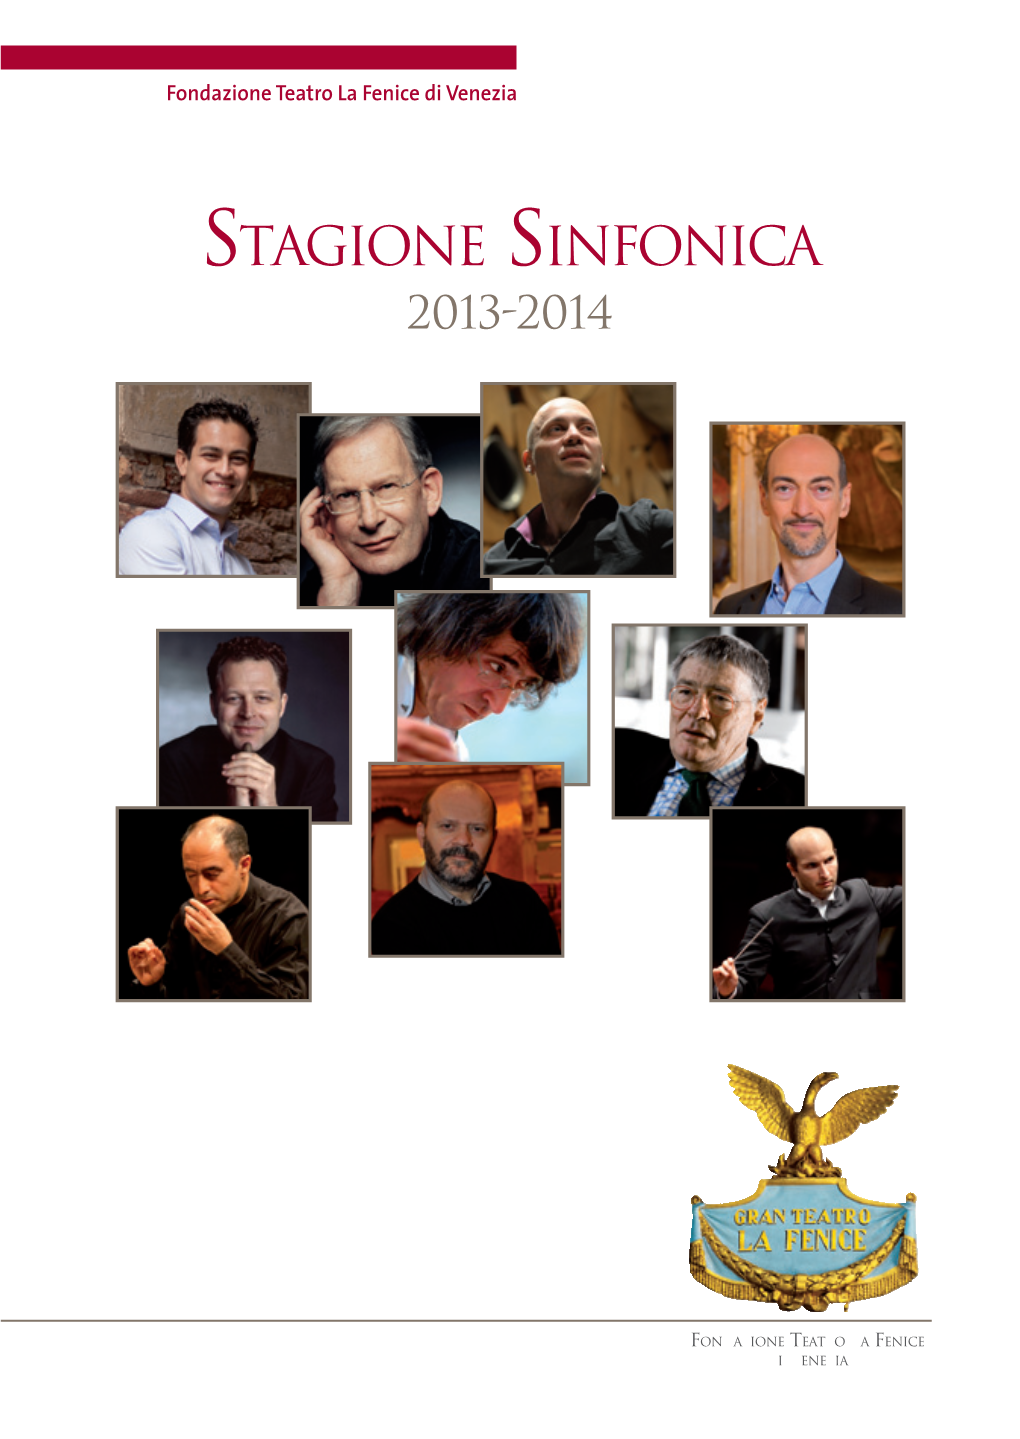 Stagione Sinfonica 2013-2014